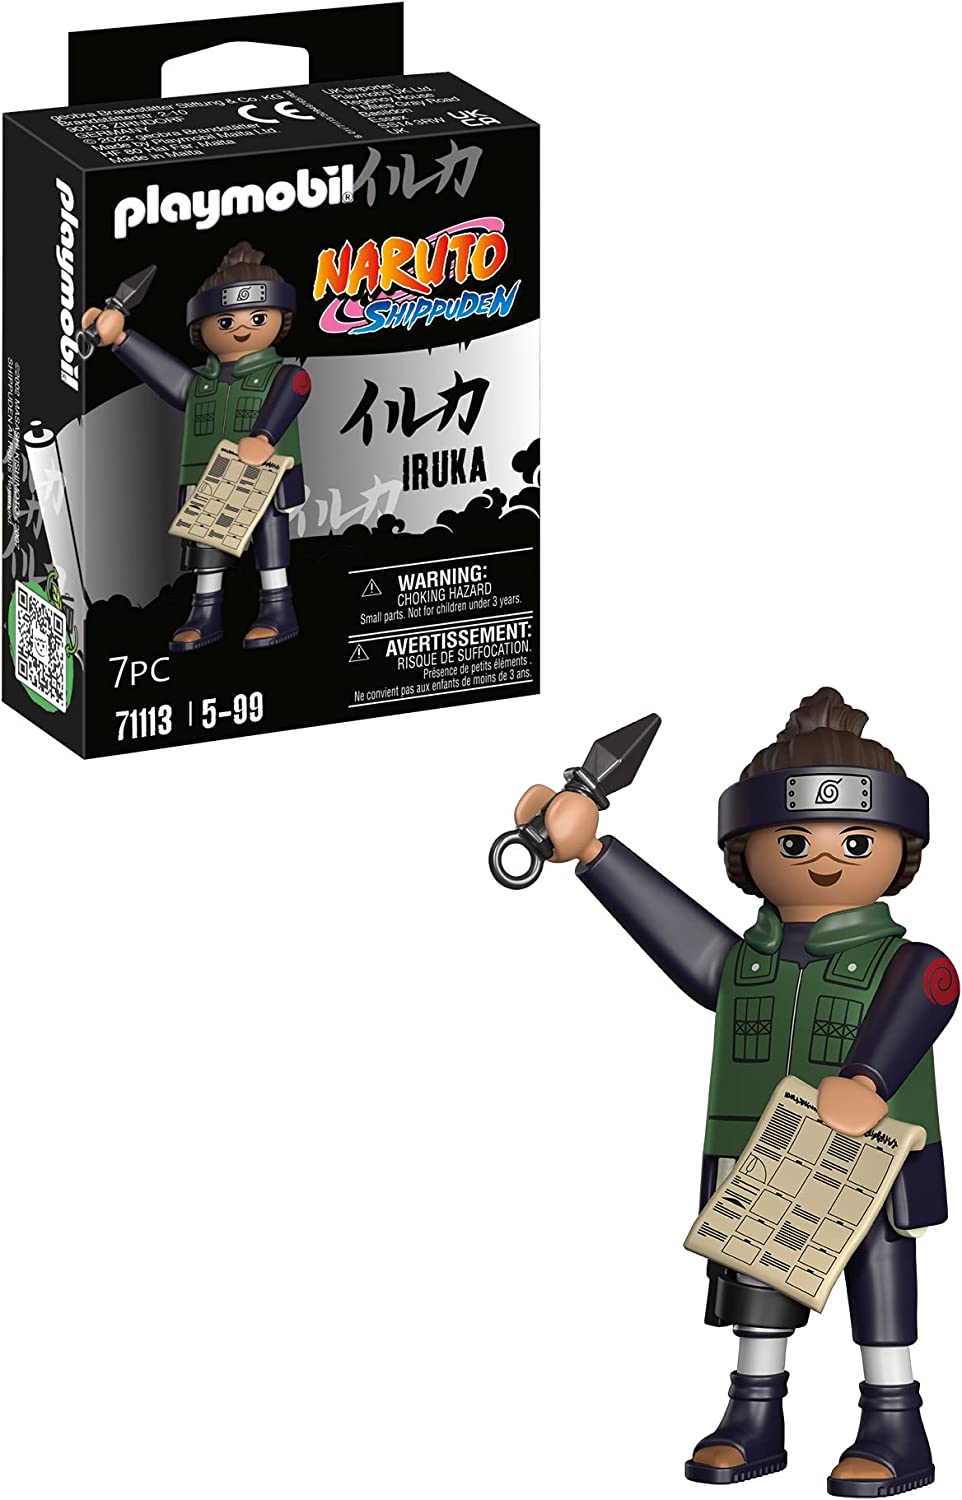 Playmobil Naruto Shippuden 71113 Iruka Dressed in Blue Combat Suit With Green Chunin Jacket, Creative Fun for Anime Fans With Great Details and Authentic Extras, 7 Pieces, From 5 Years